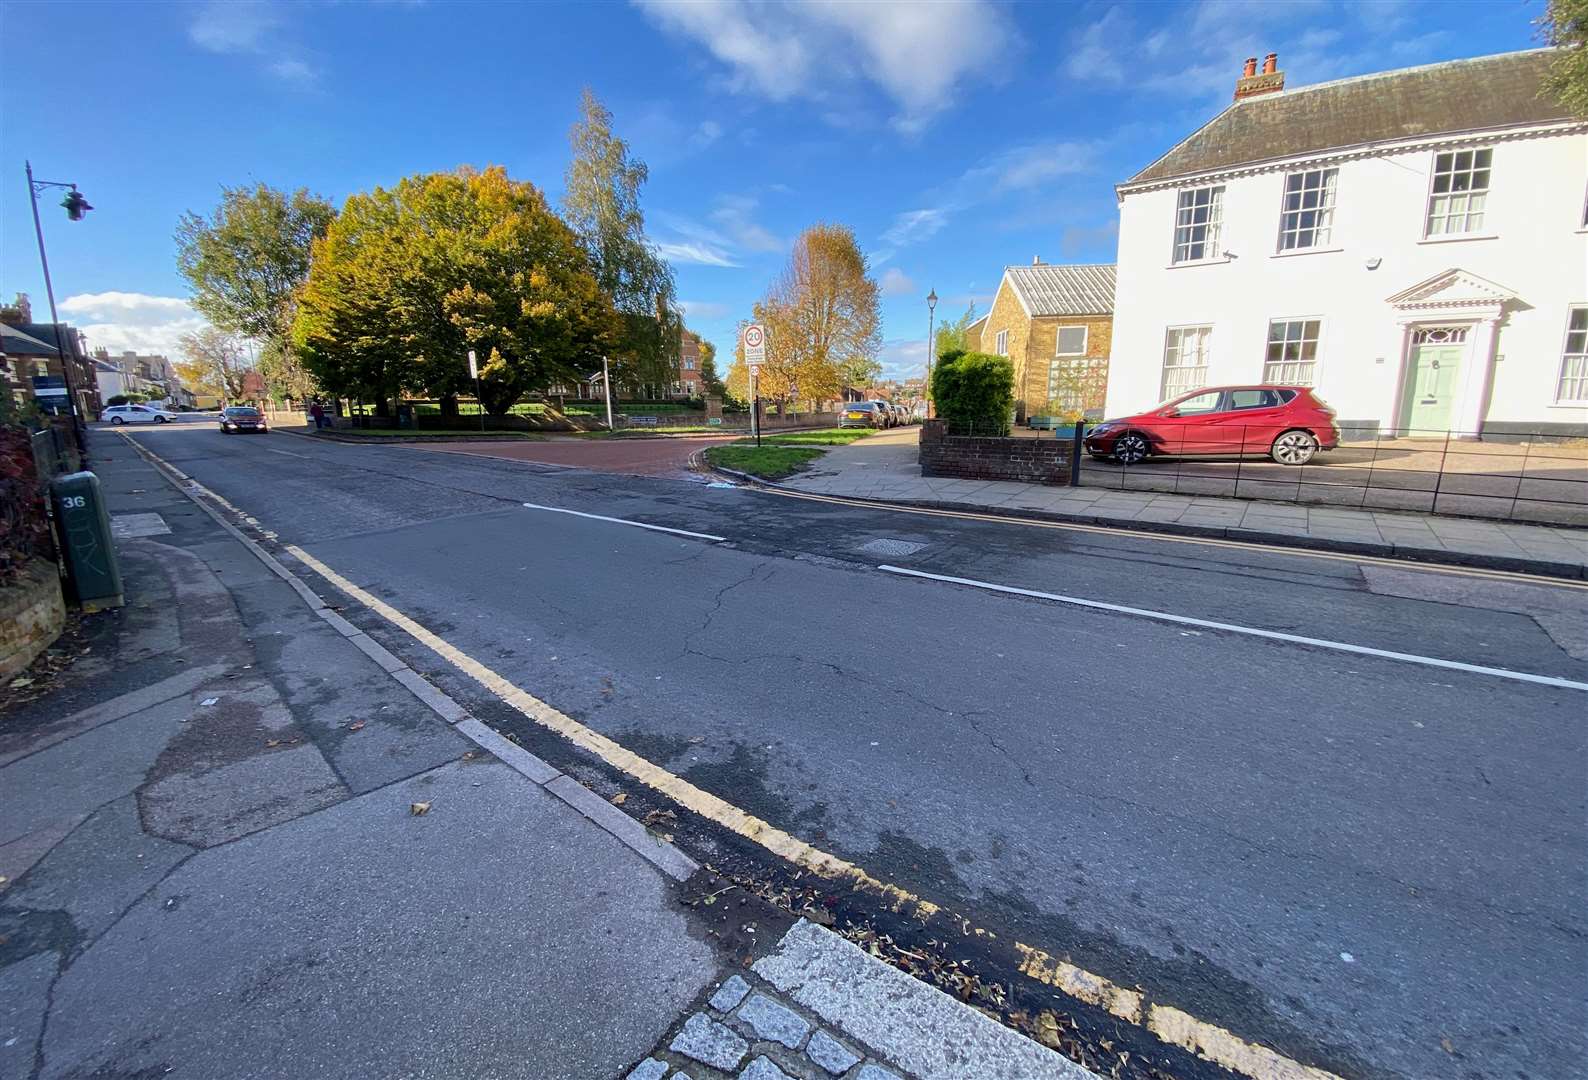 Funding for the scheme was secured through a new Active Travel scheme to improve facilities for cyclists and pedestrians. Picture: Faversham Town Council/Space Syntax